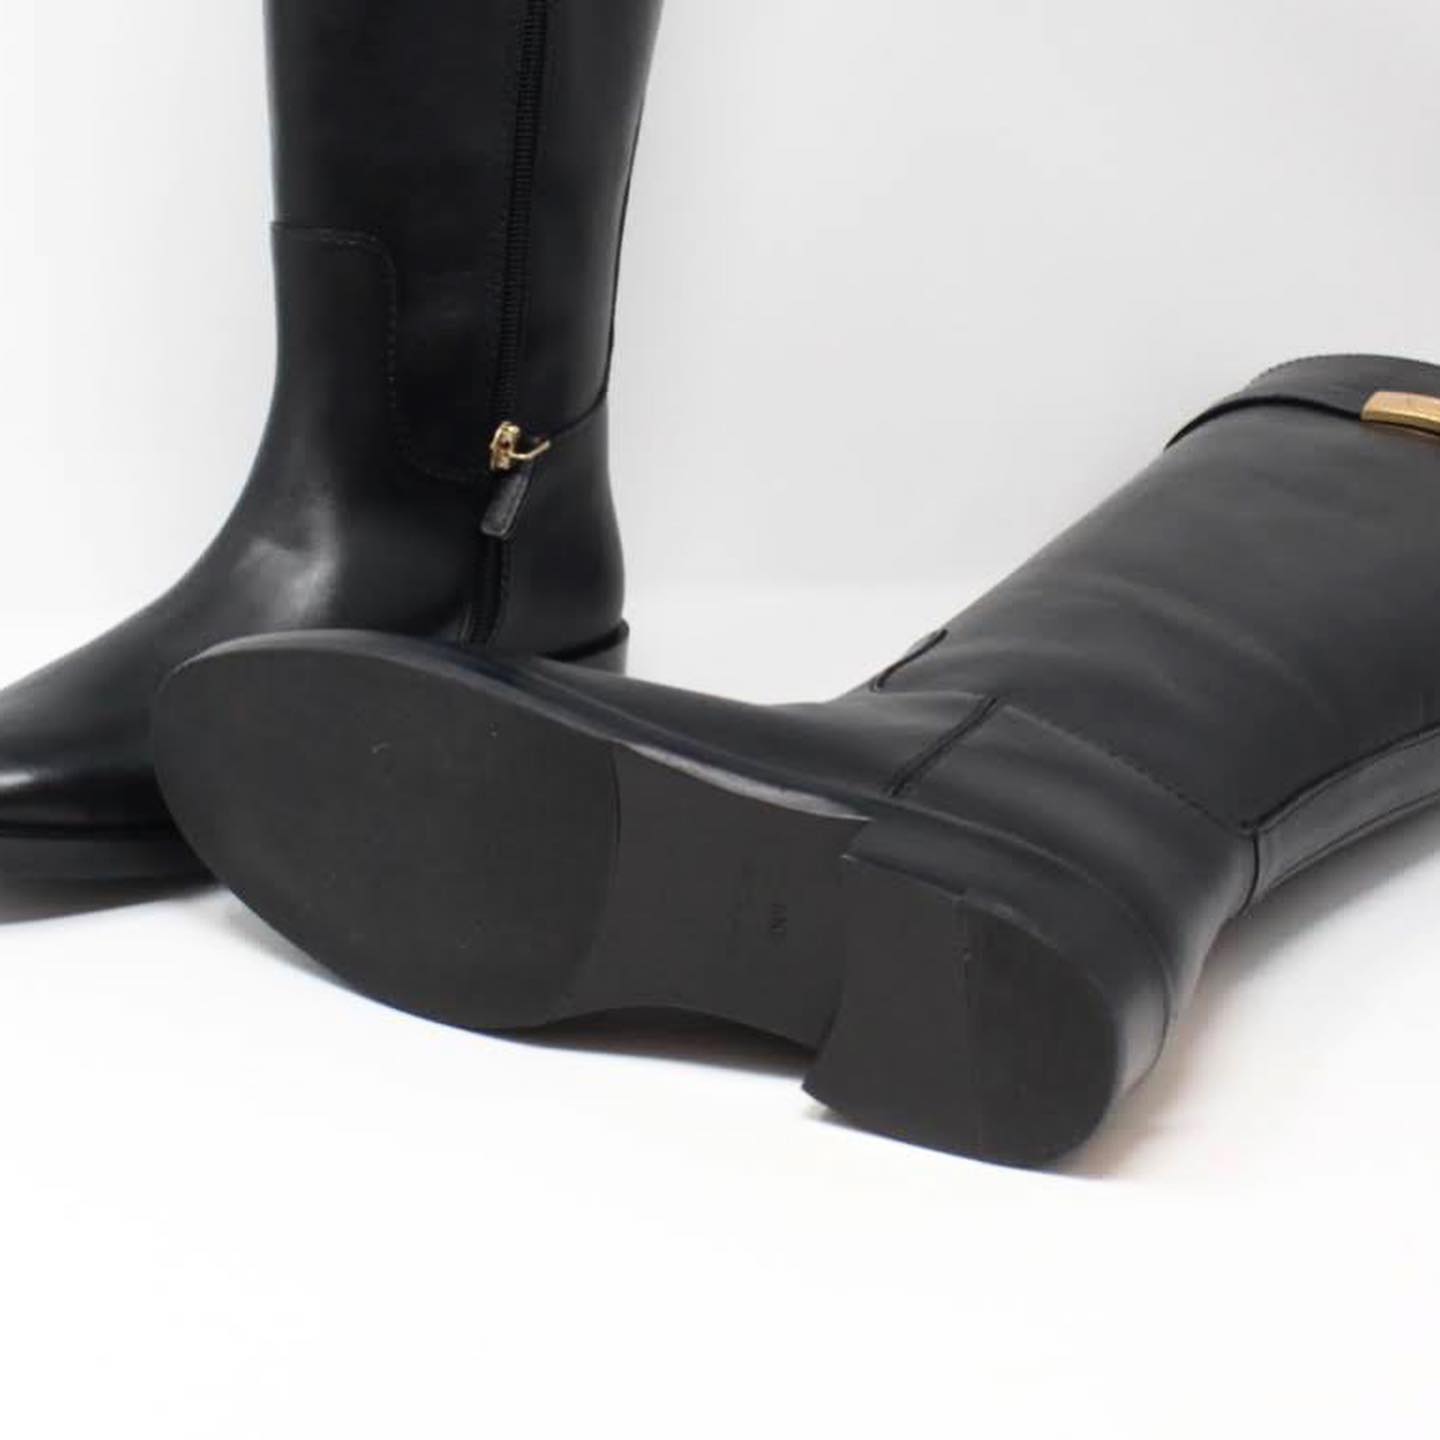 Leather riding boots Louis Vuitton Black size 37 EU in Leather